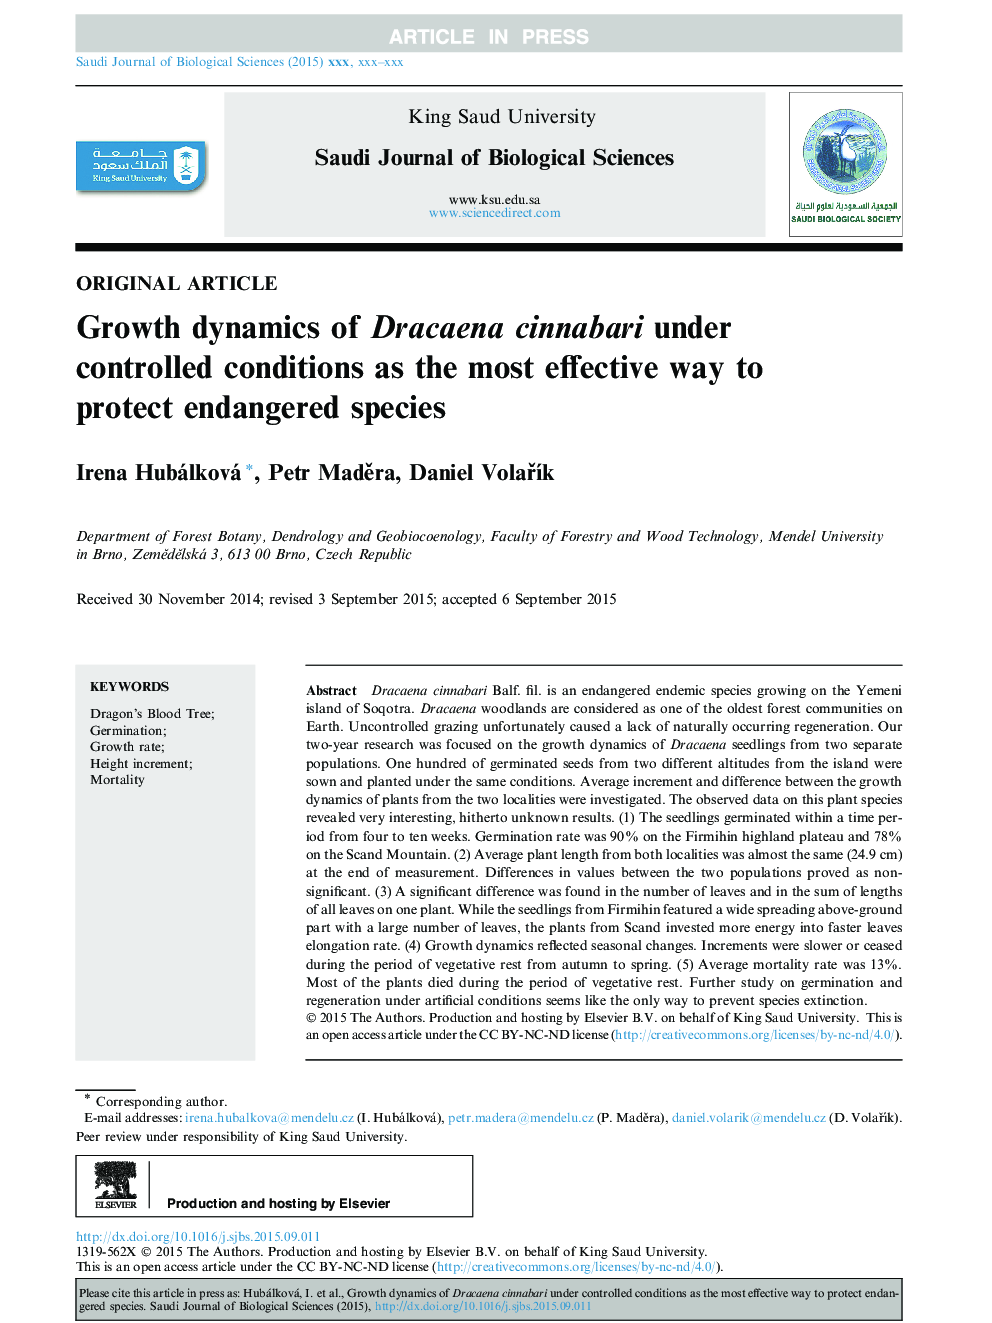 Growth dynamics of Dracaena cinnabari under controlled conditions as the most effective way to protect endangered species